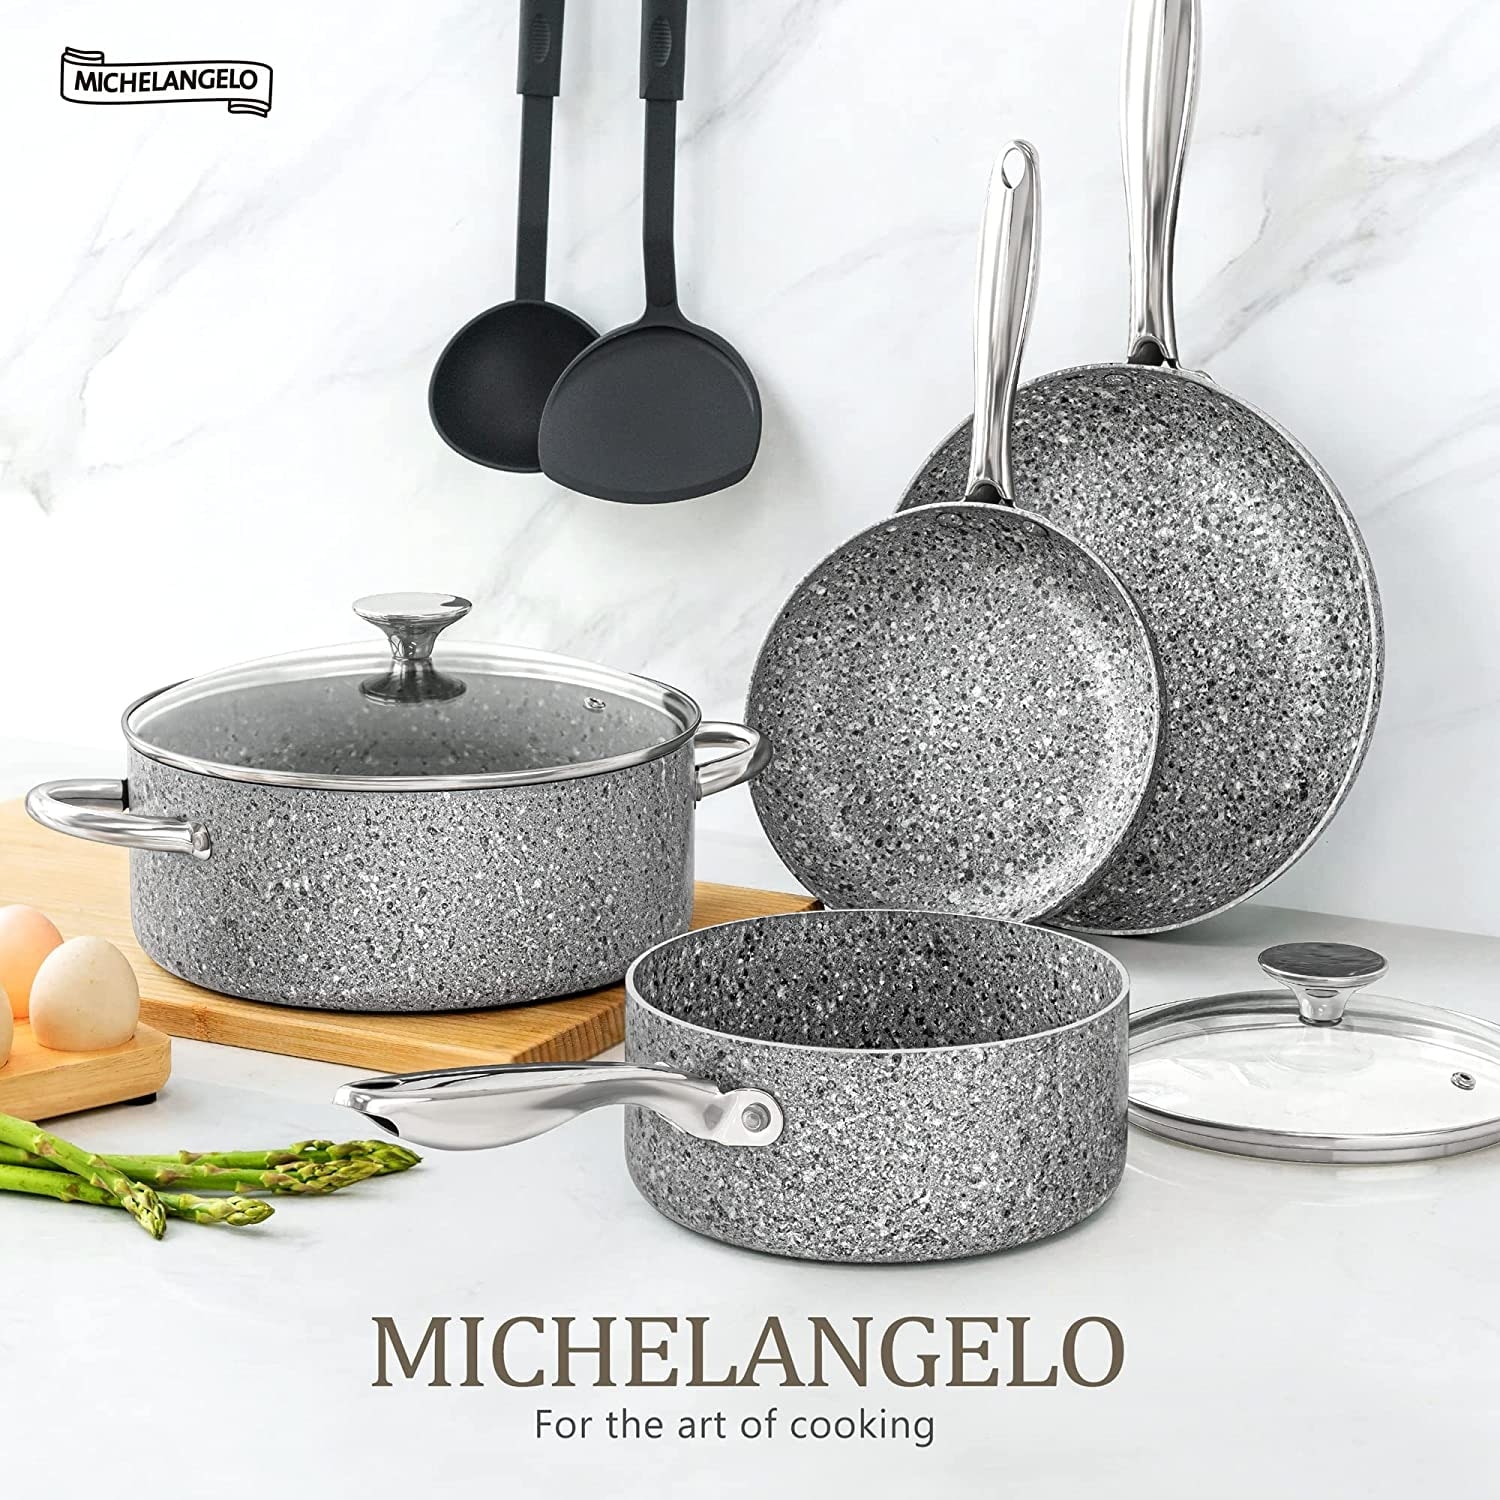  MICHELANGELO Pots and Pans Set 16 Piece, Nonstick Kitchen  Cookware Sets with Granite Coating, Nonstick Pots and Pans Set, Nonstick  Granite Cookware Set with Pan Protectors: Home & Kitchen